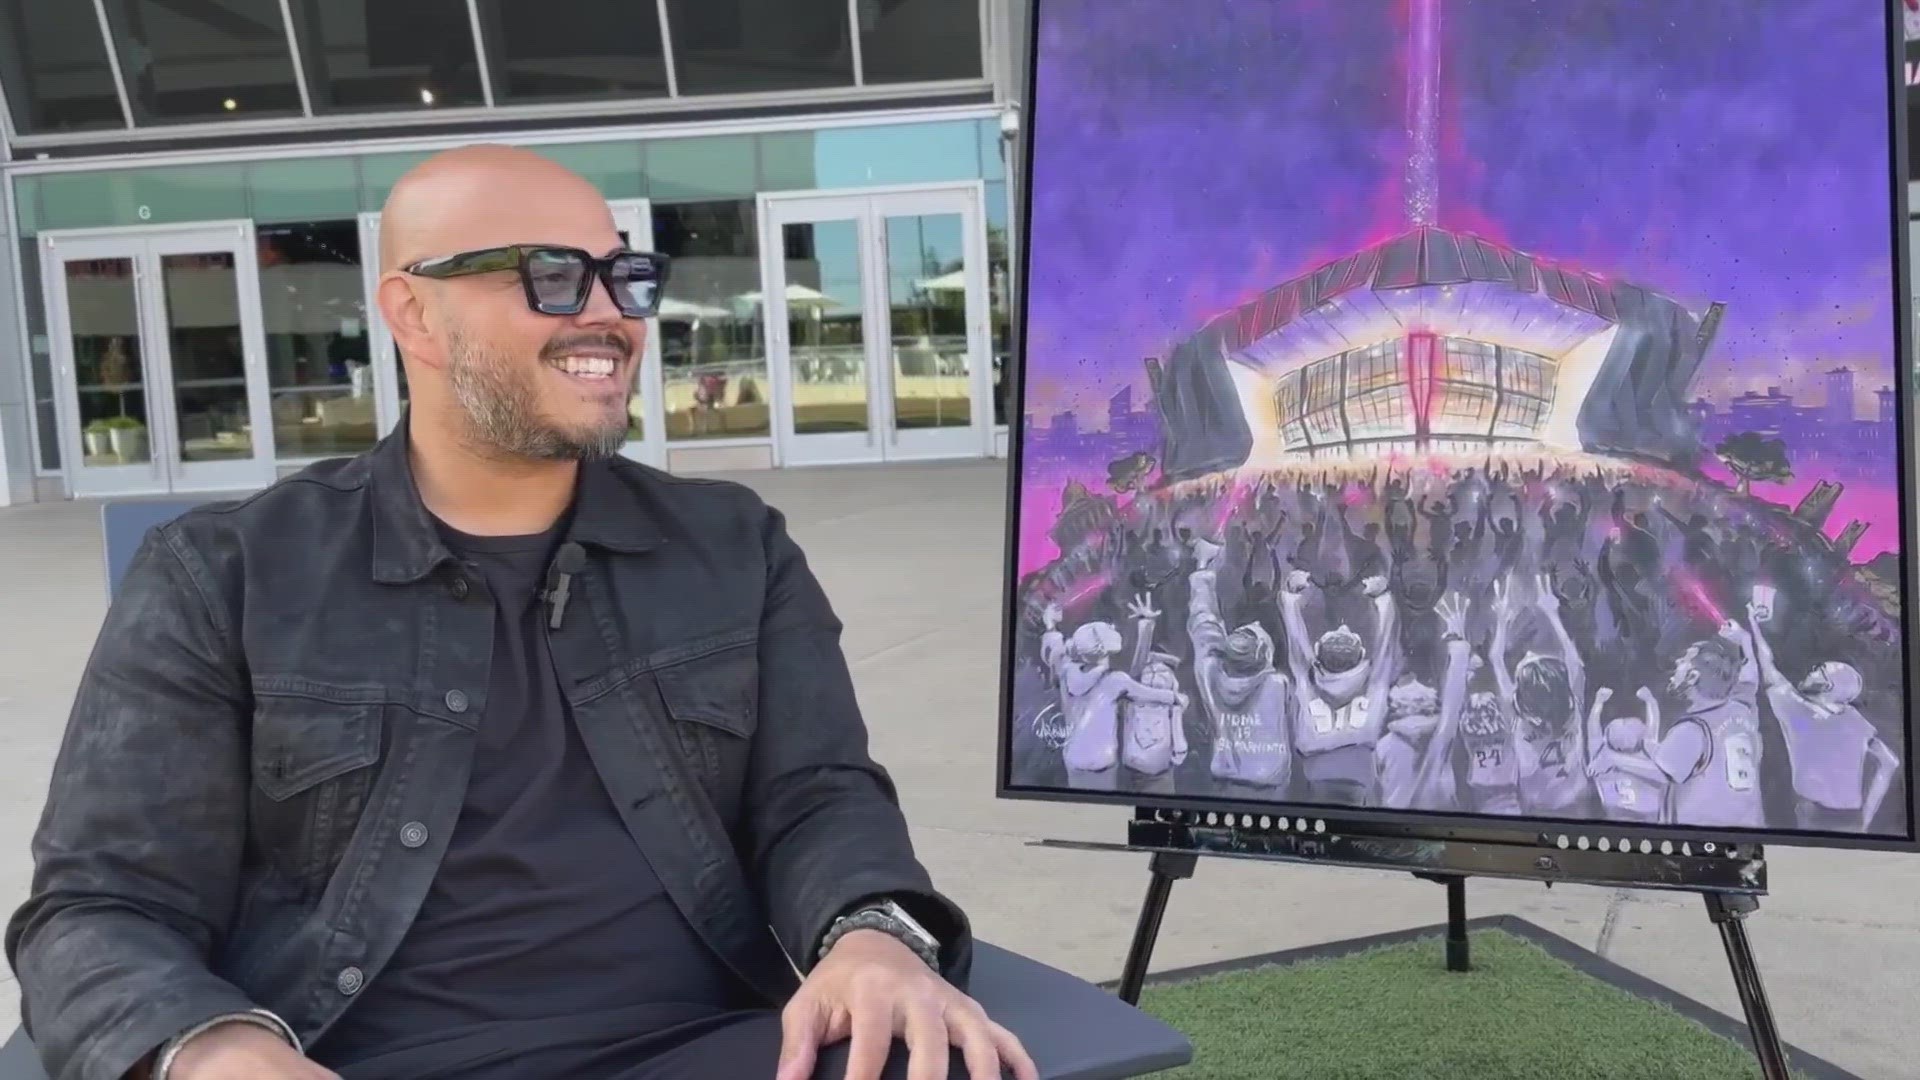 'Kings fever' isn't over yet as people are waking up excited to show their purple pride. But David Garibaldi uses his art to highlight the Kings in a different way.